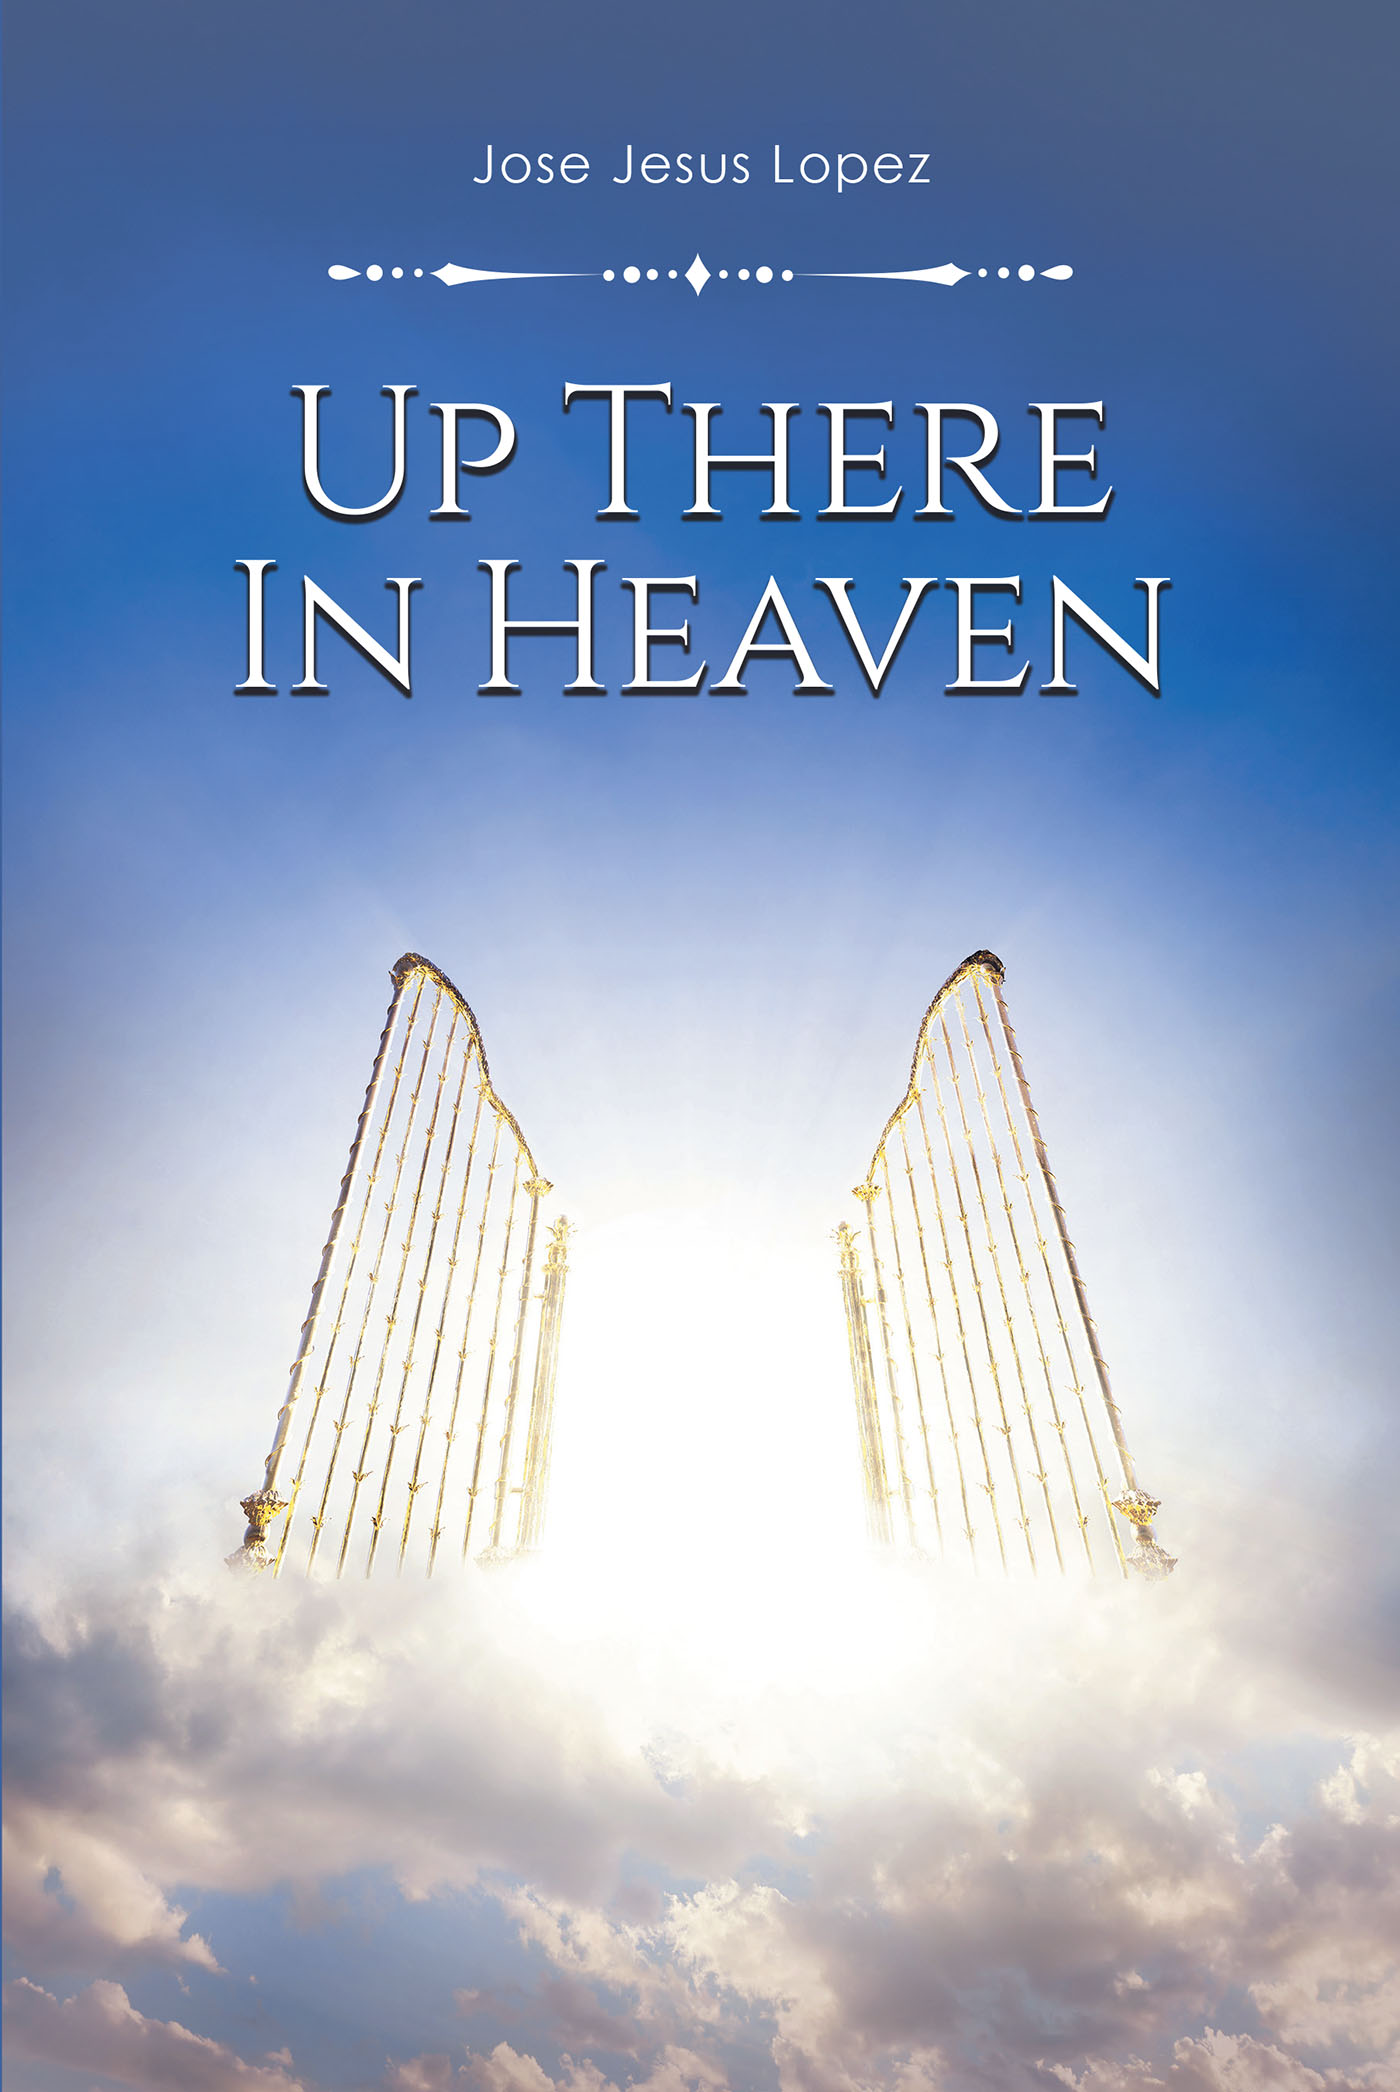 Jose Jesus Lopez’s Newly Released "Up There in Heaven" is an Inspiring and Enlightening Account of the Author’s Experience in Heaven Following a Deadly Accident